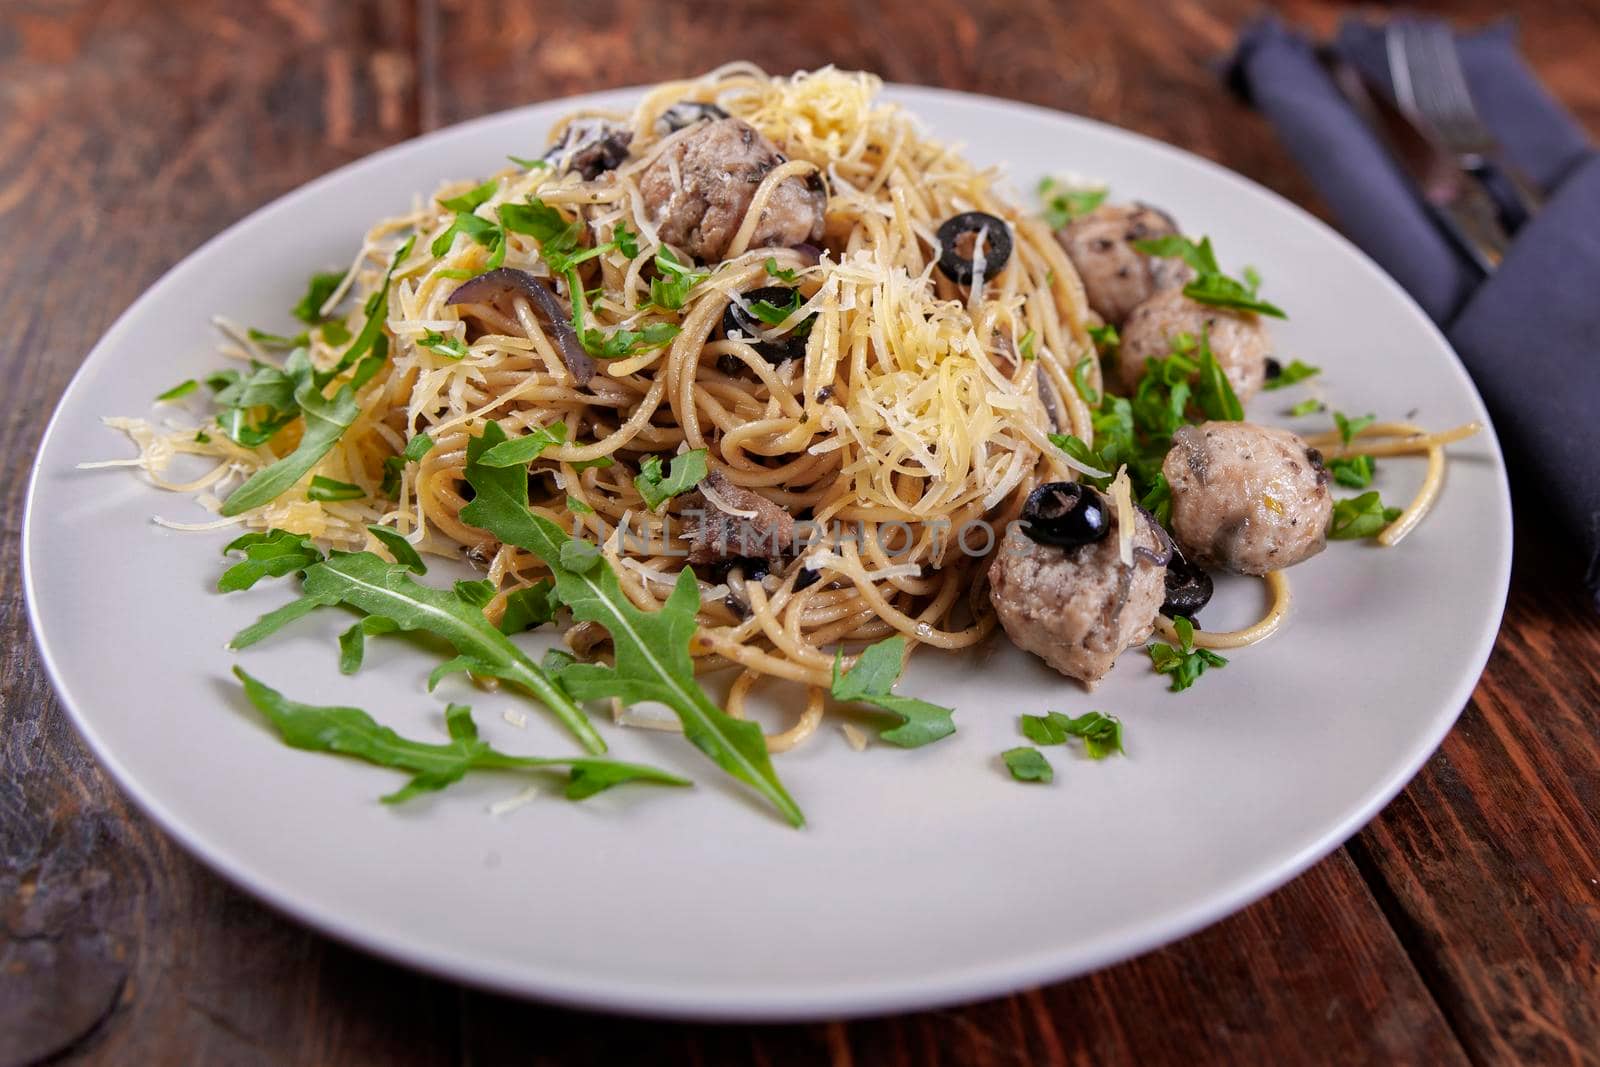 Spaghetti with meatballs, olives and arugula on wood table by Jyliana